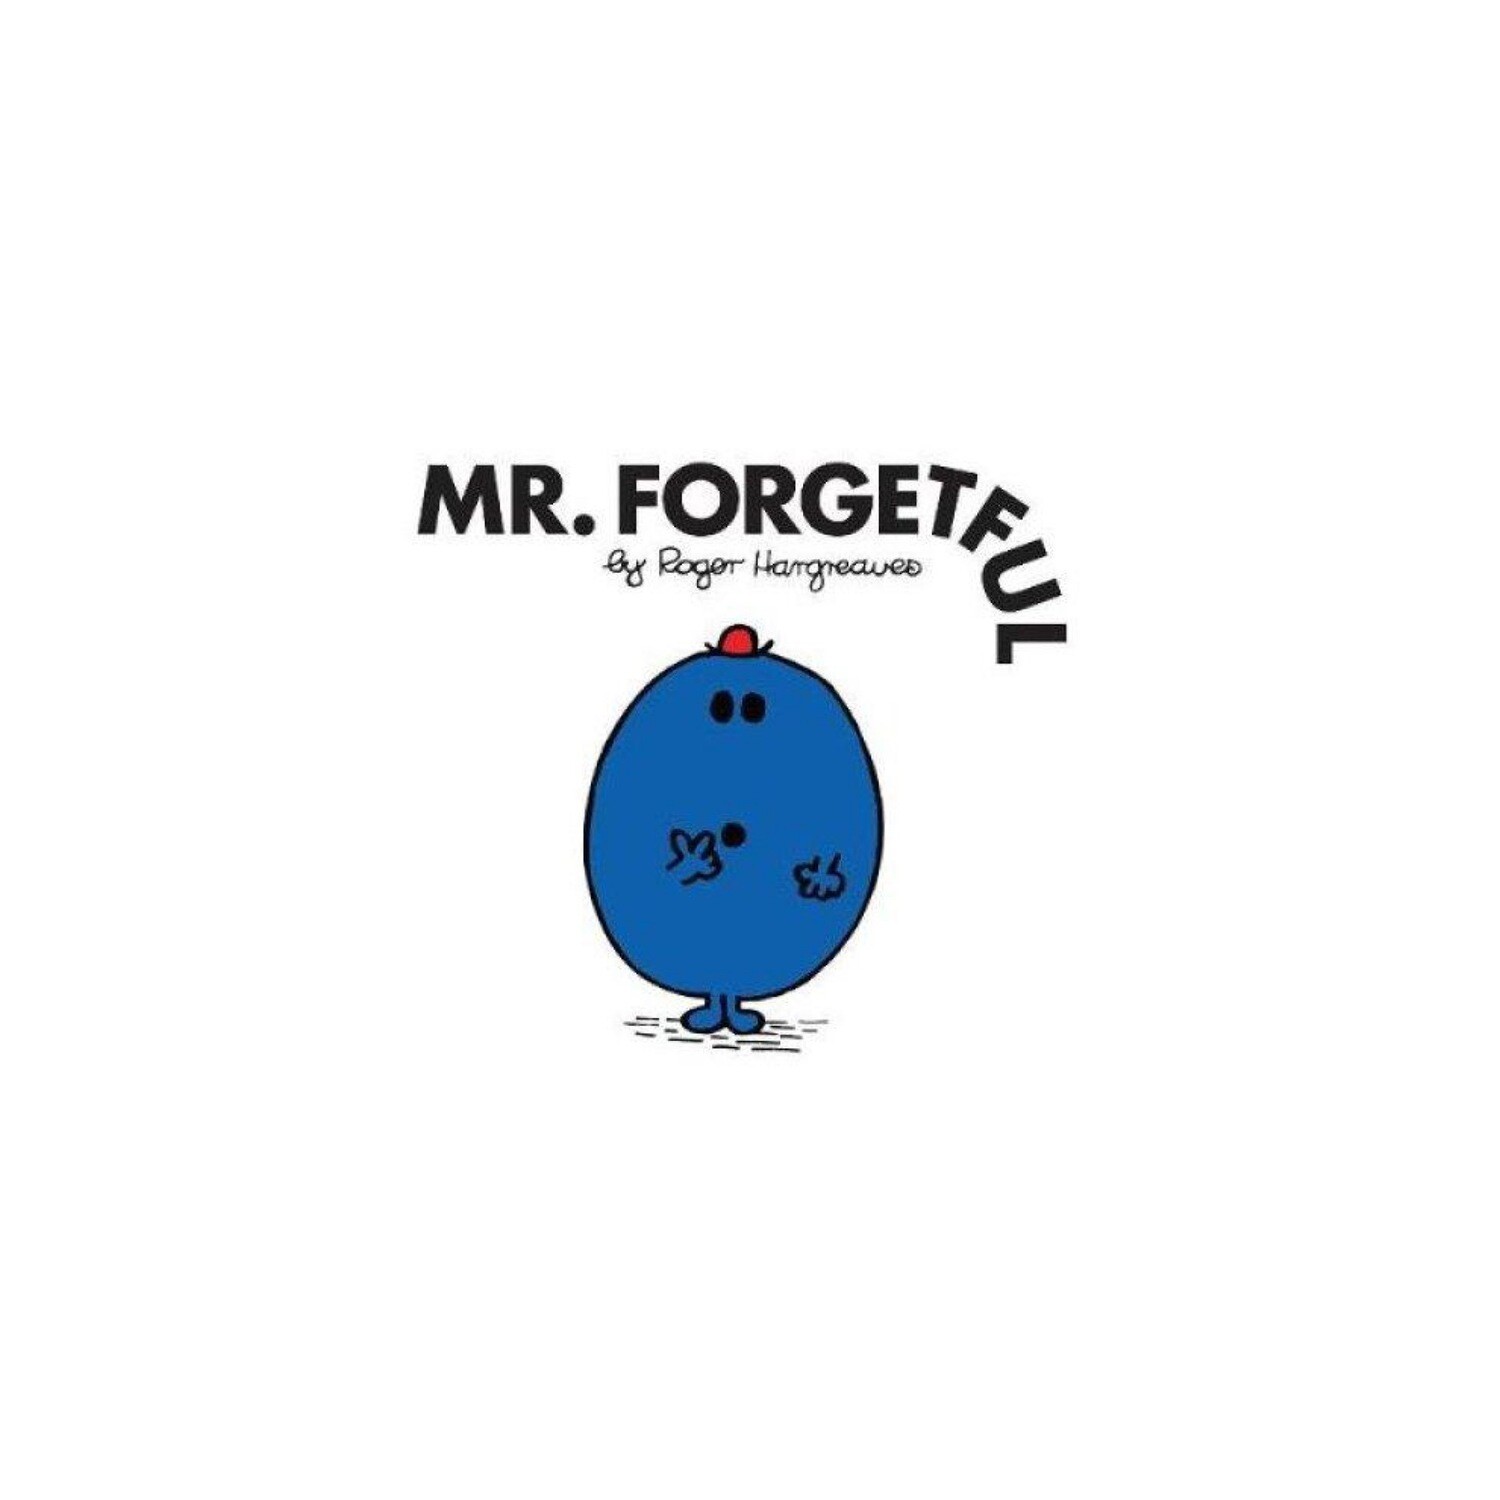 Mr. Forgetful by Roger HargReaves